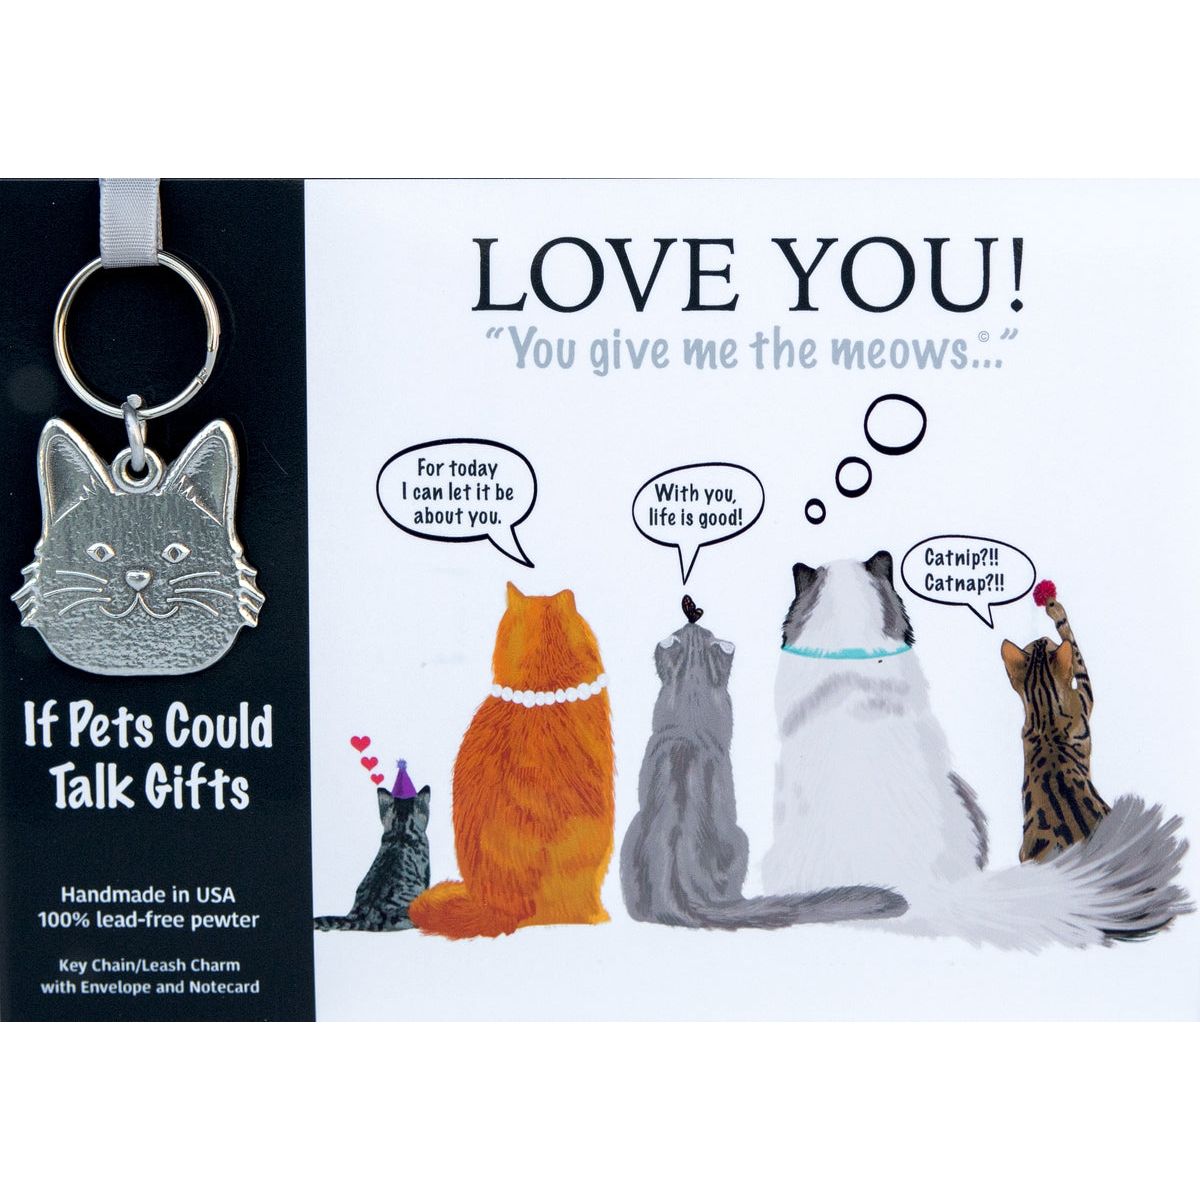 Pewter keychain in shape of a cat&#39;s face packaged with a &quot;Love You&quot; card.